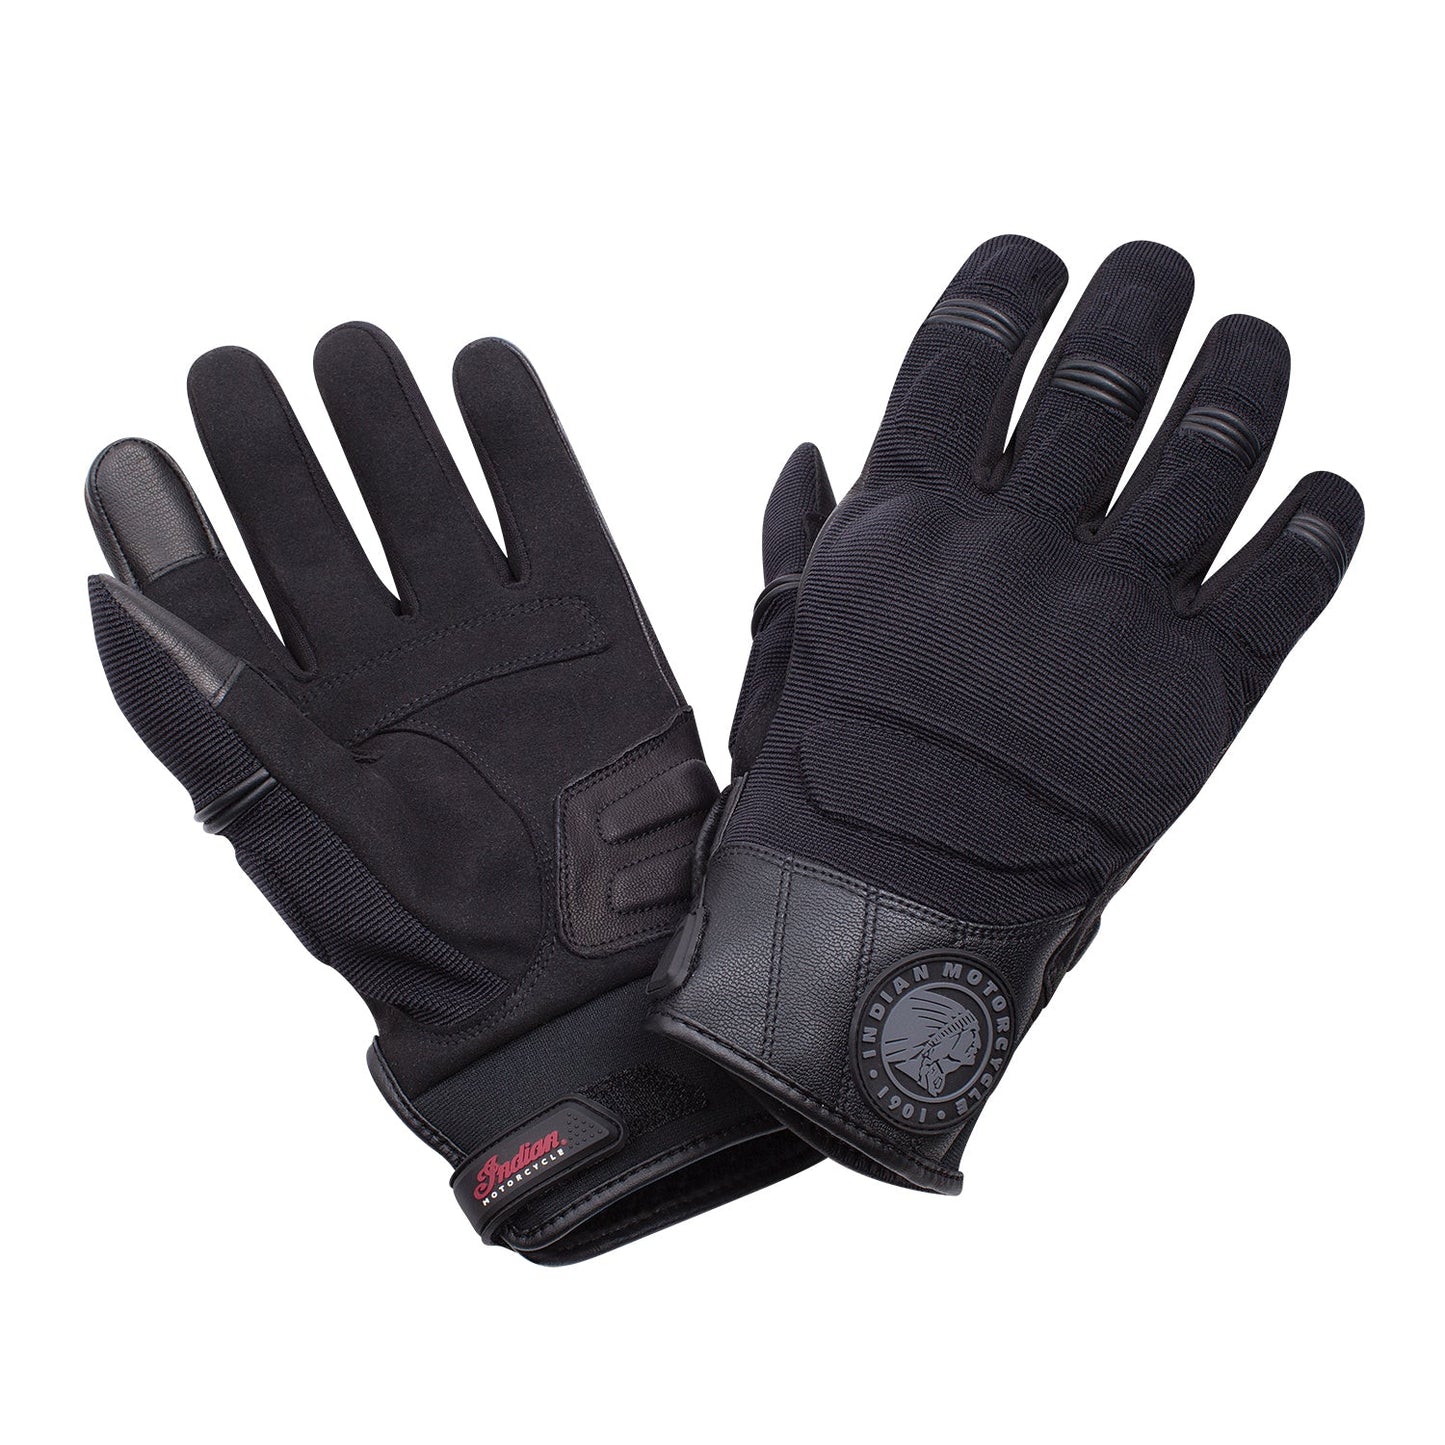 Men's Passage Riding Gloves with Hard Knuckles -Black